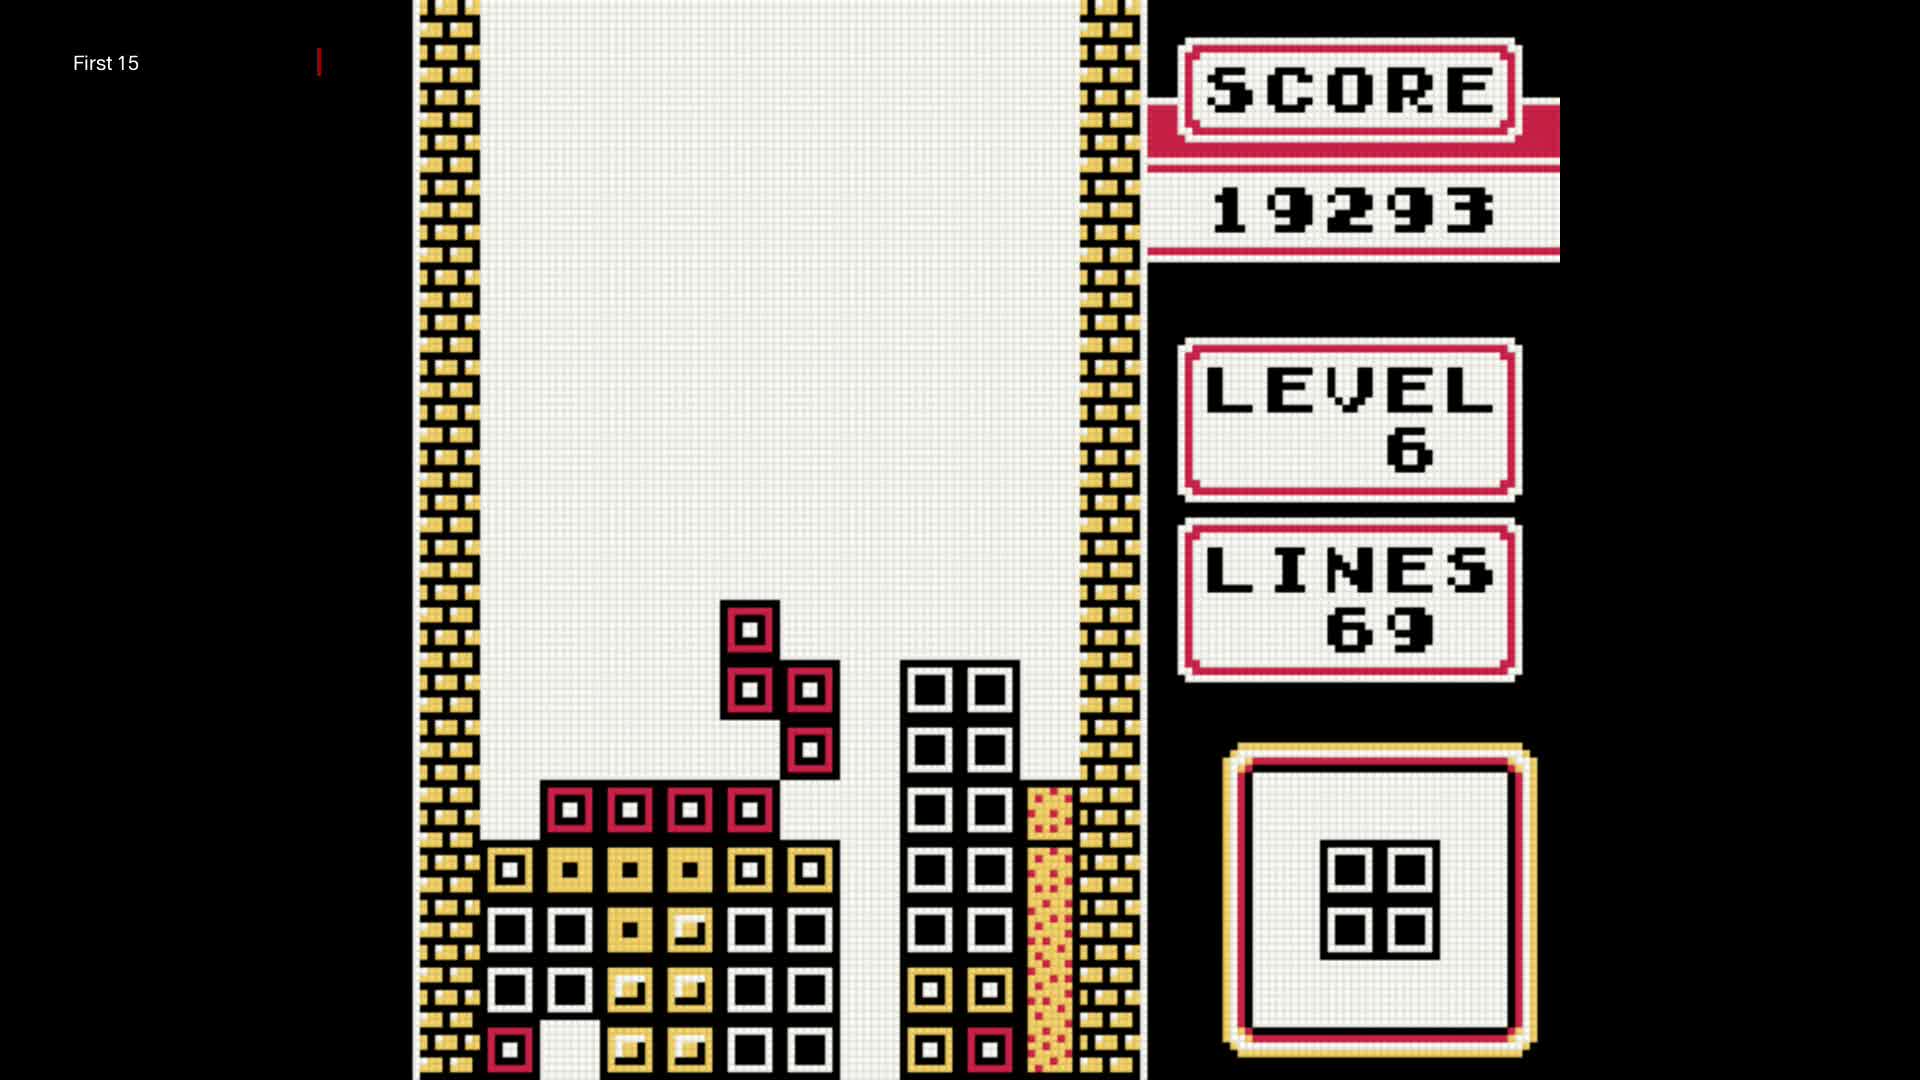 The First 15 Mintues of Tetris (Game Boy)